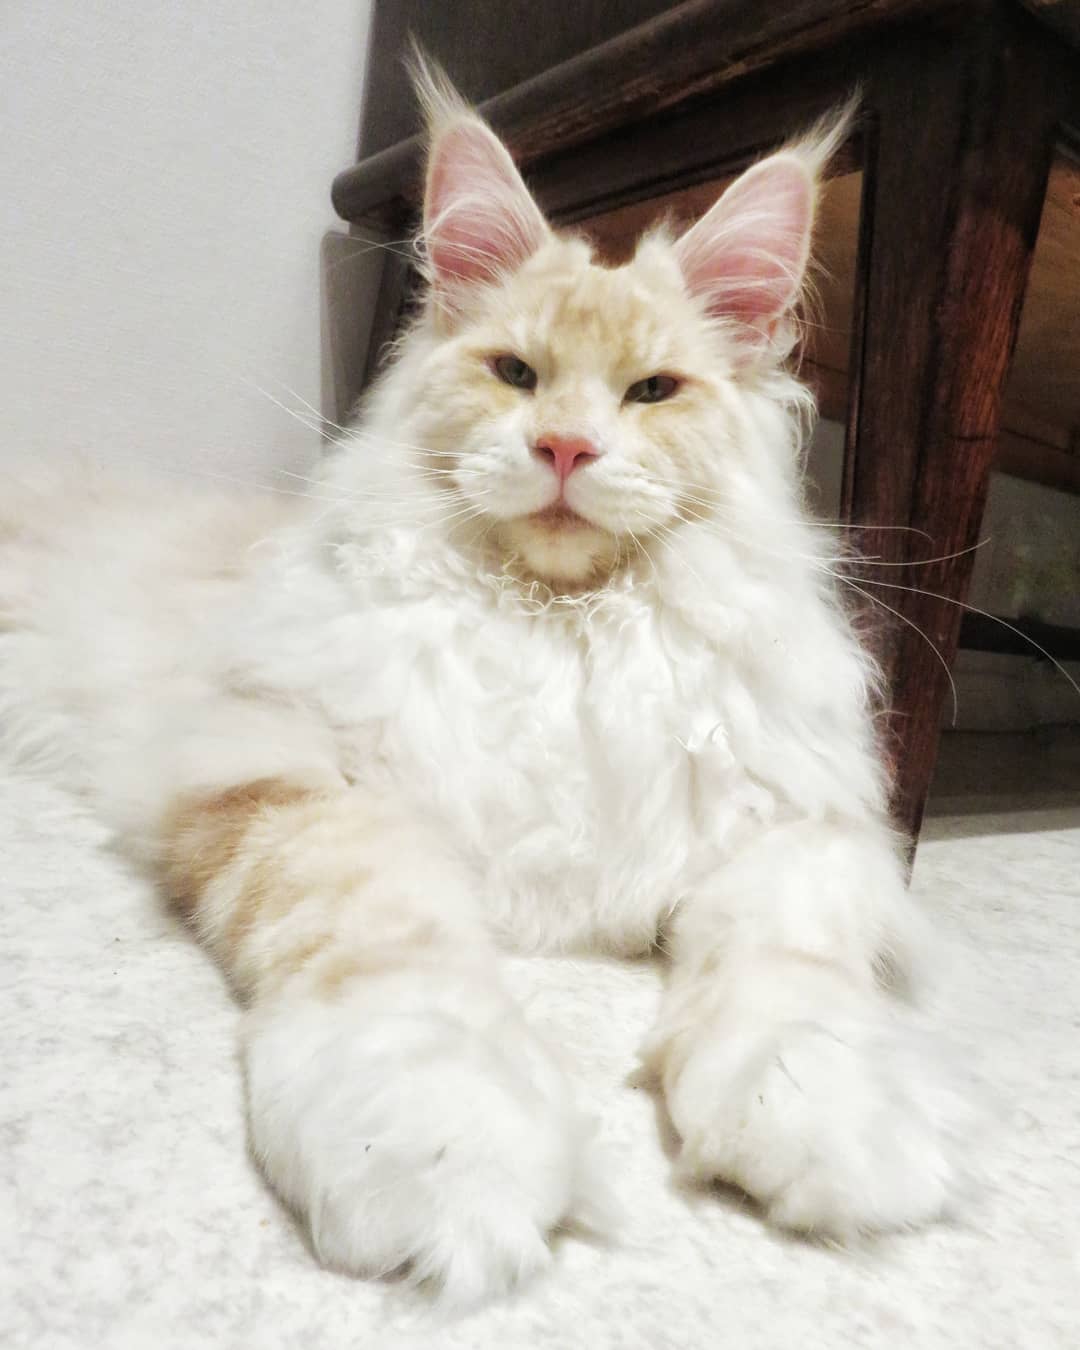 Meet Lotus, The Huge Fluffy Maine Coon Cat That's Going Viral On